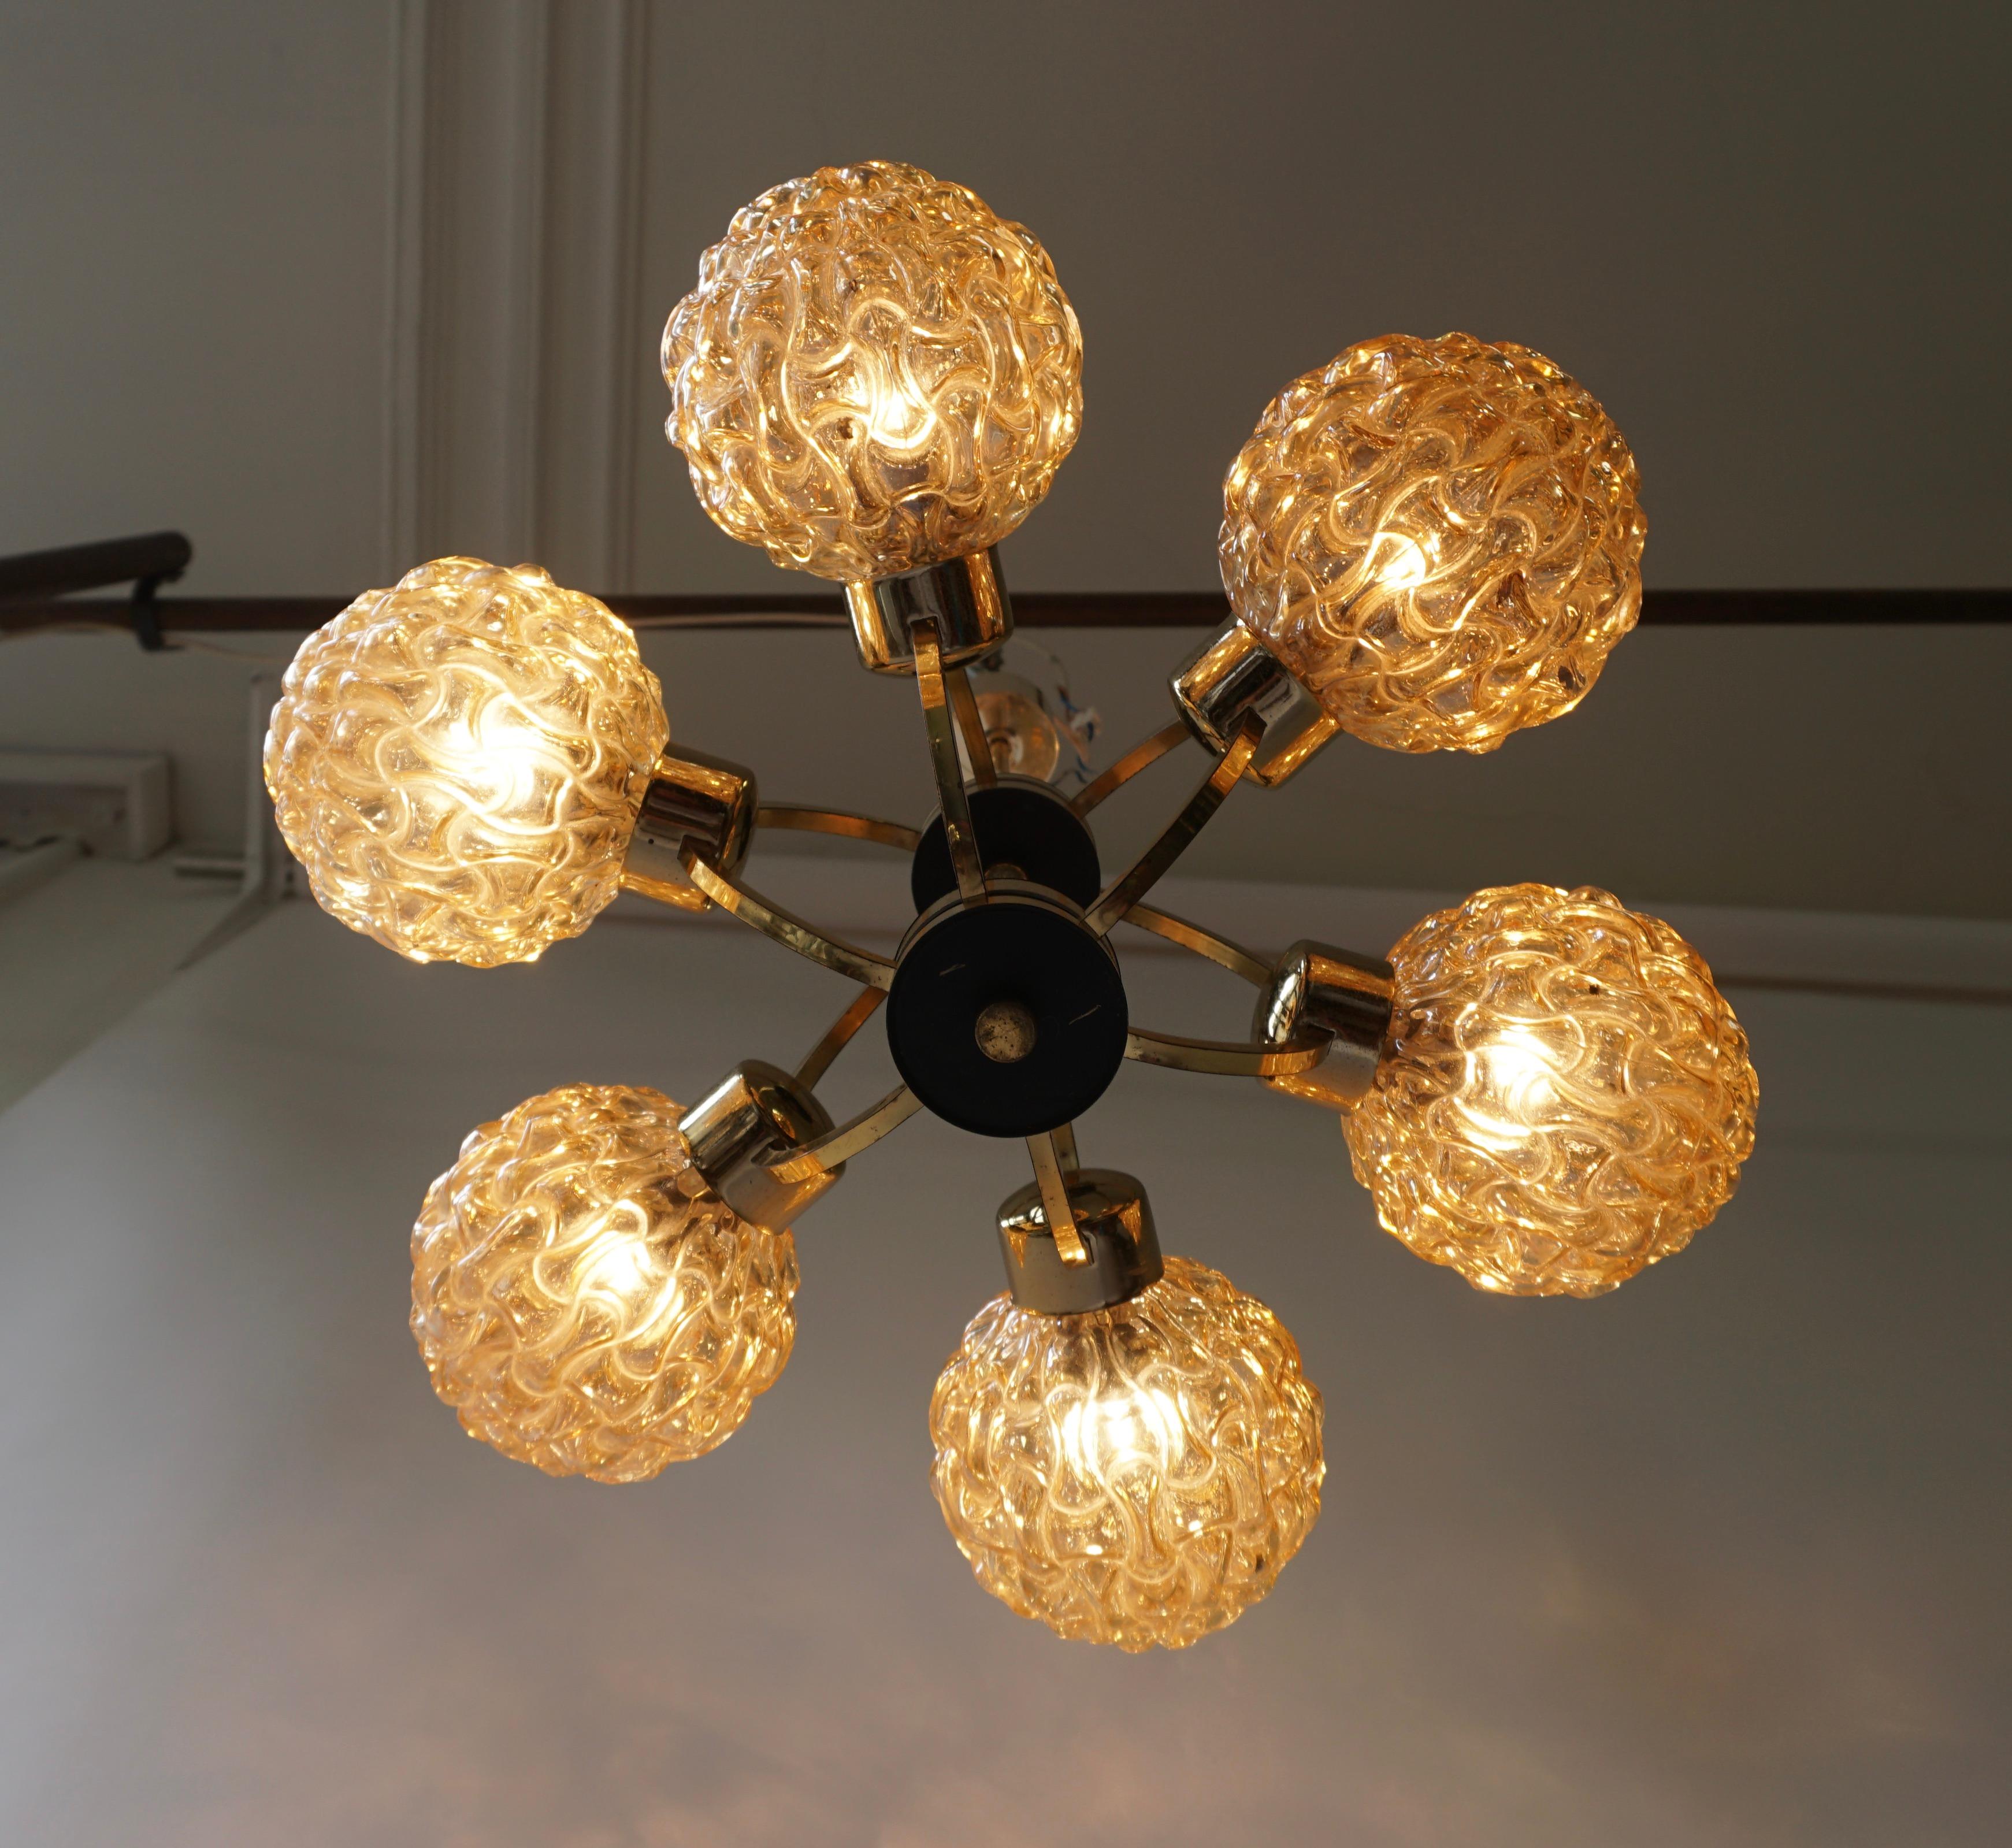 Beautiful bubble glass chandelier or pendant light designed by Helena Tynell for Glashu¨tte Limburg. A design Classic, the amber colored or toned hand blown glass gives a wonderful warm glow. 

Helena Tynell is a finish glass and ceramics